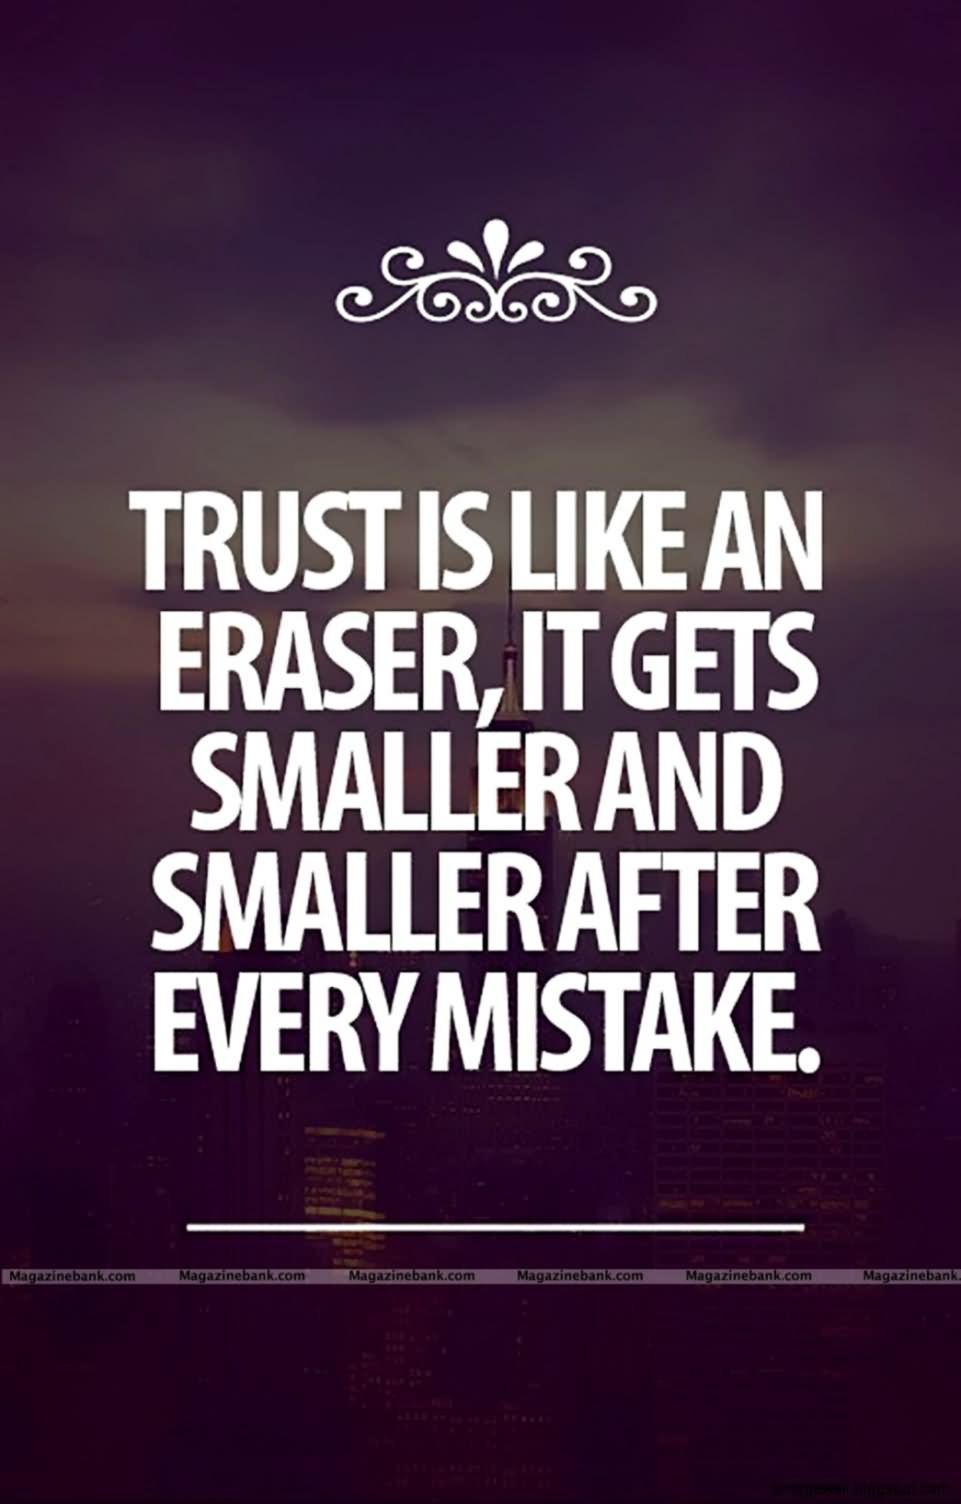 Trust Is Like An Eraser, It Gets Smaller And Smaller After Every Mistake.